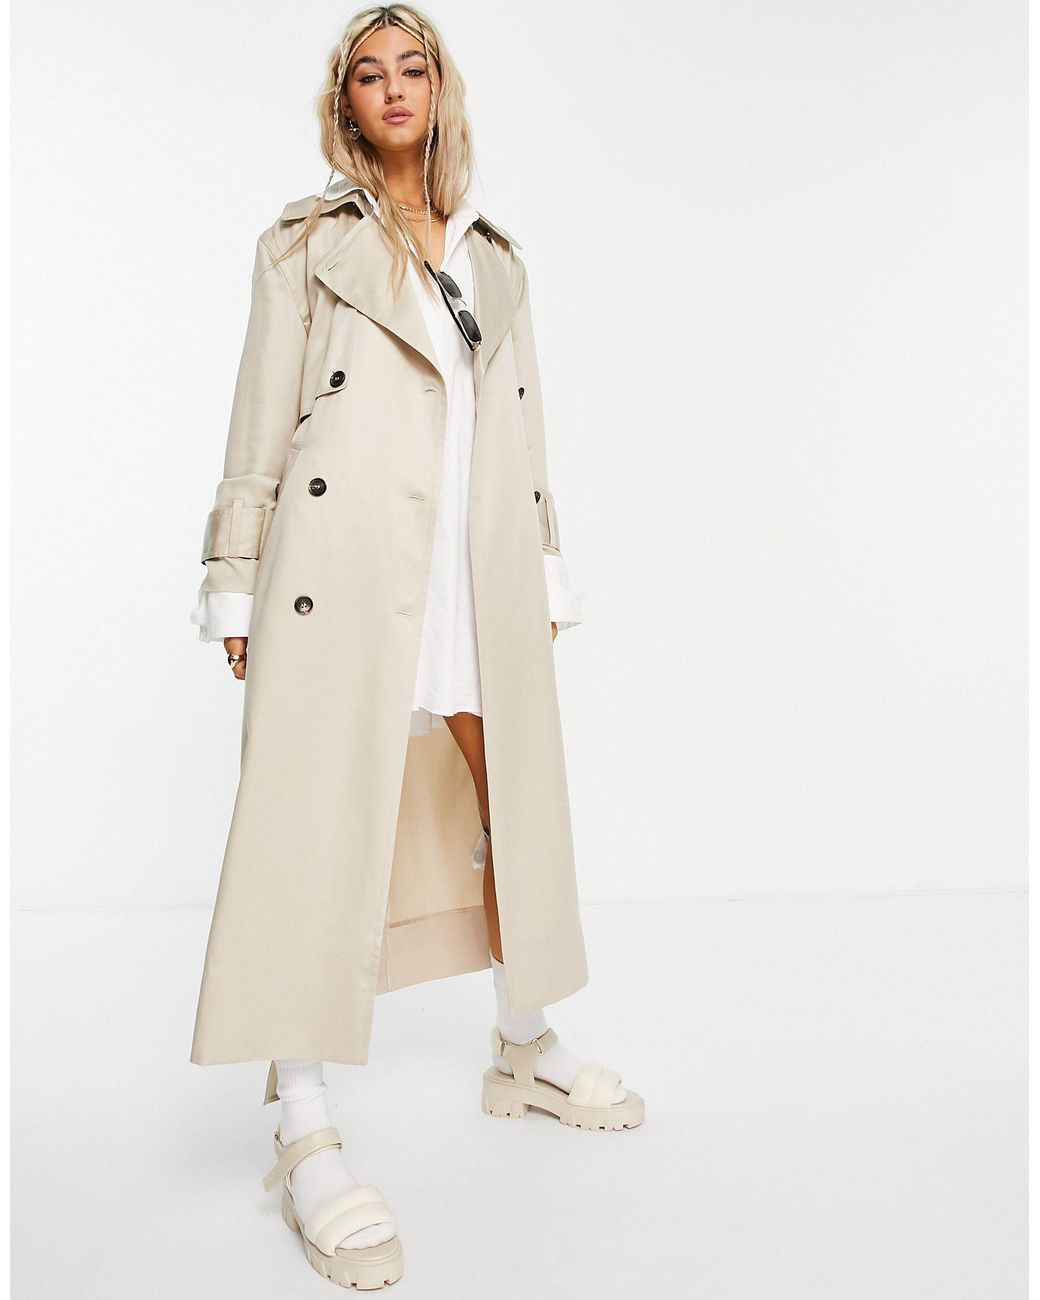 Weekday Cassidy Trench Coat | vlr.eng.br